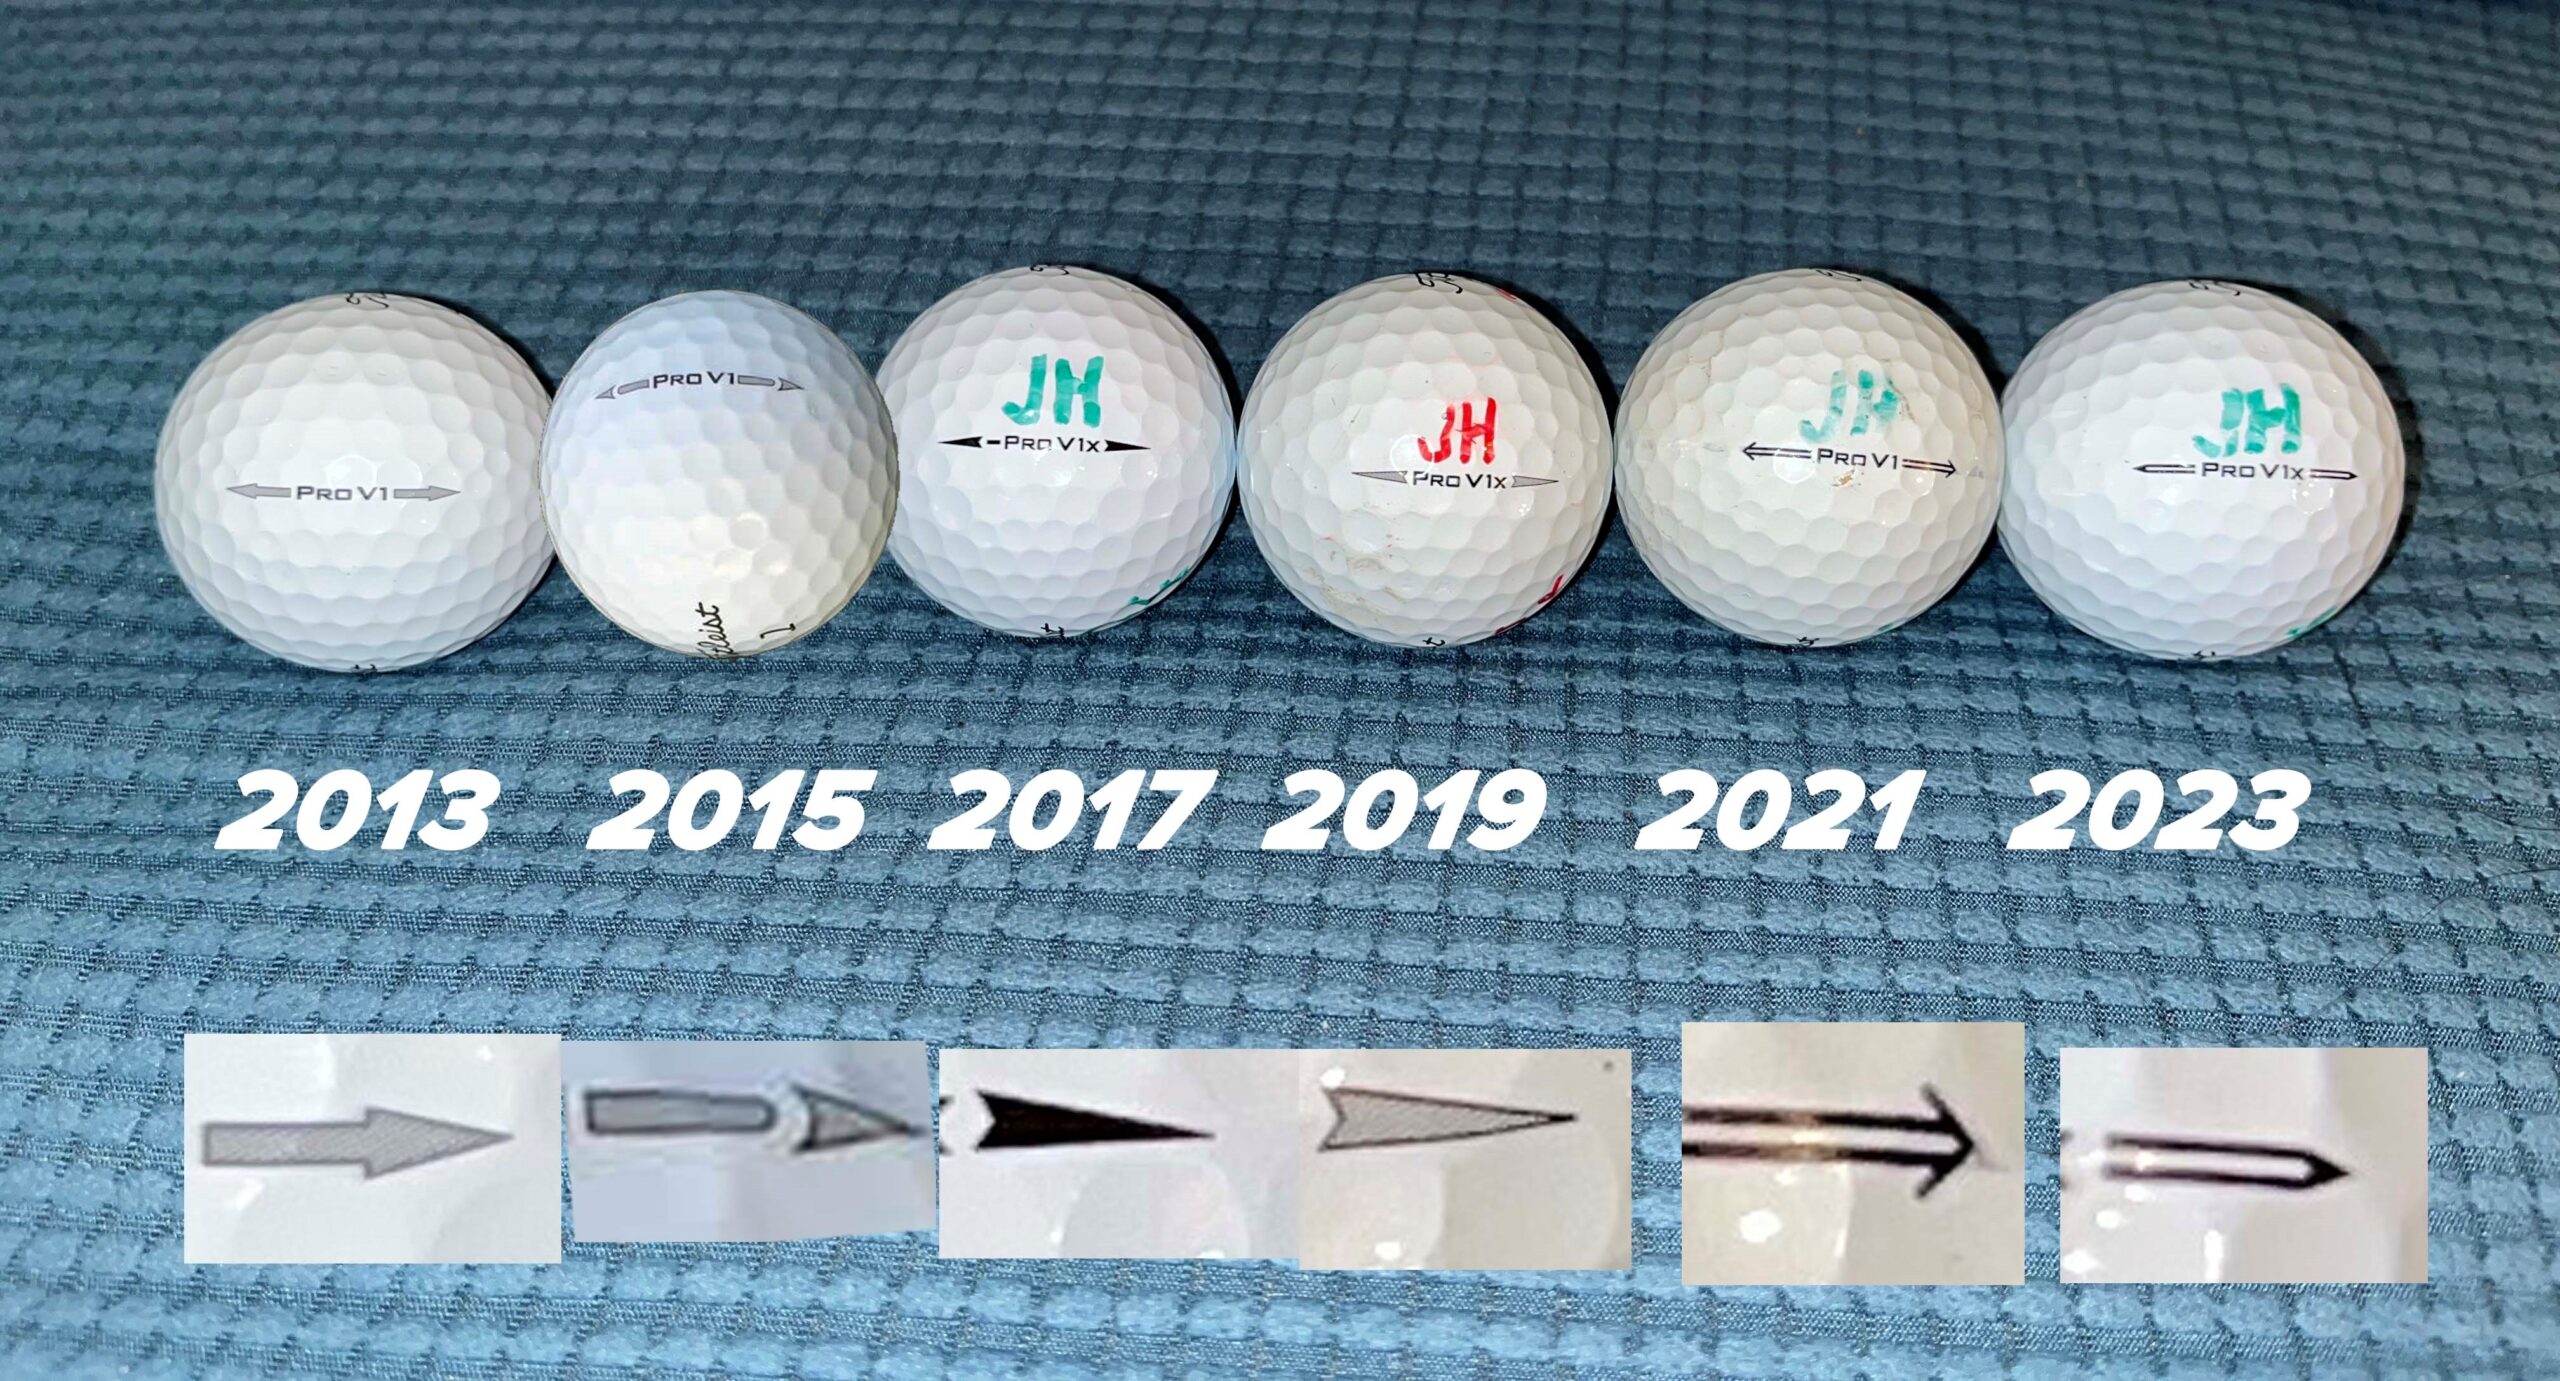 How to identify year of a Titleist ProV1 by markings Joel Harris